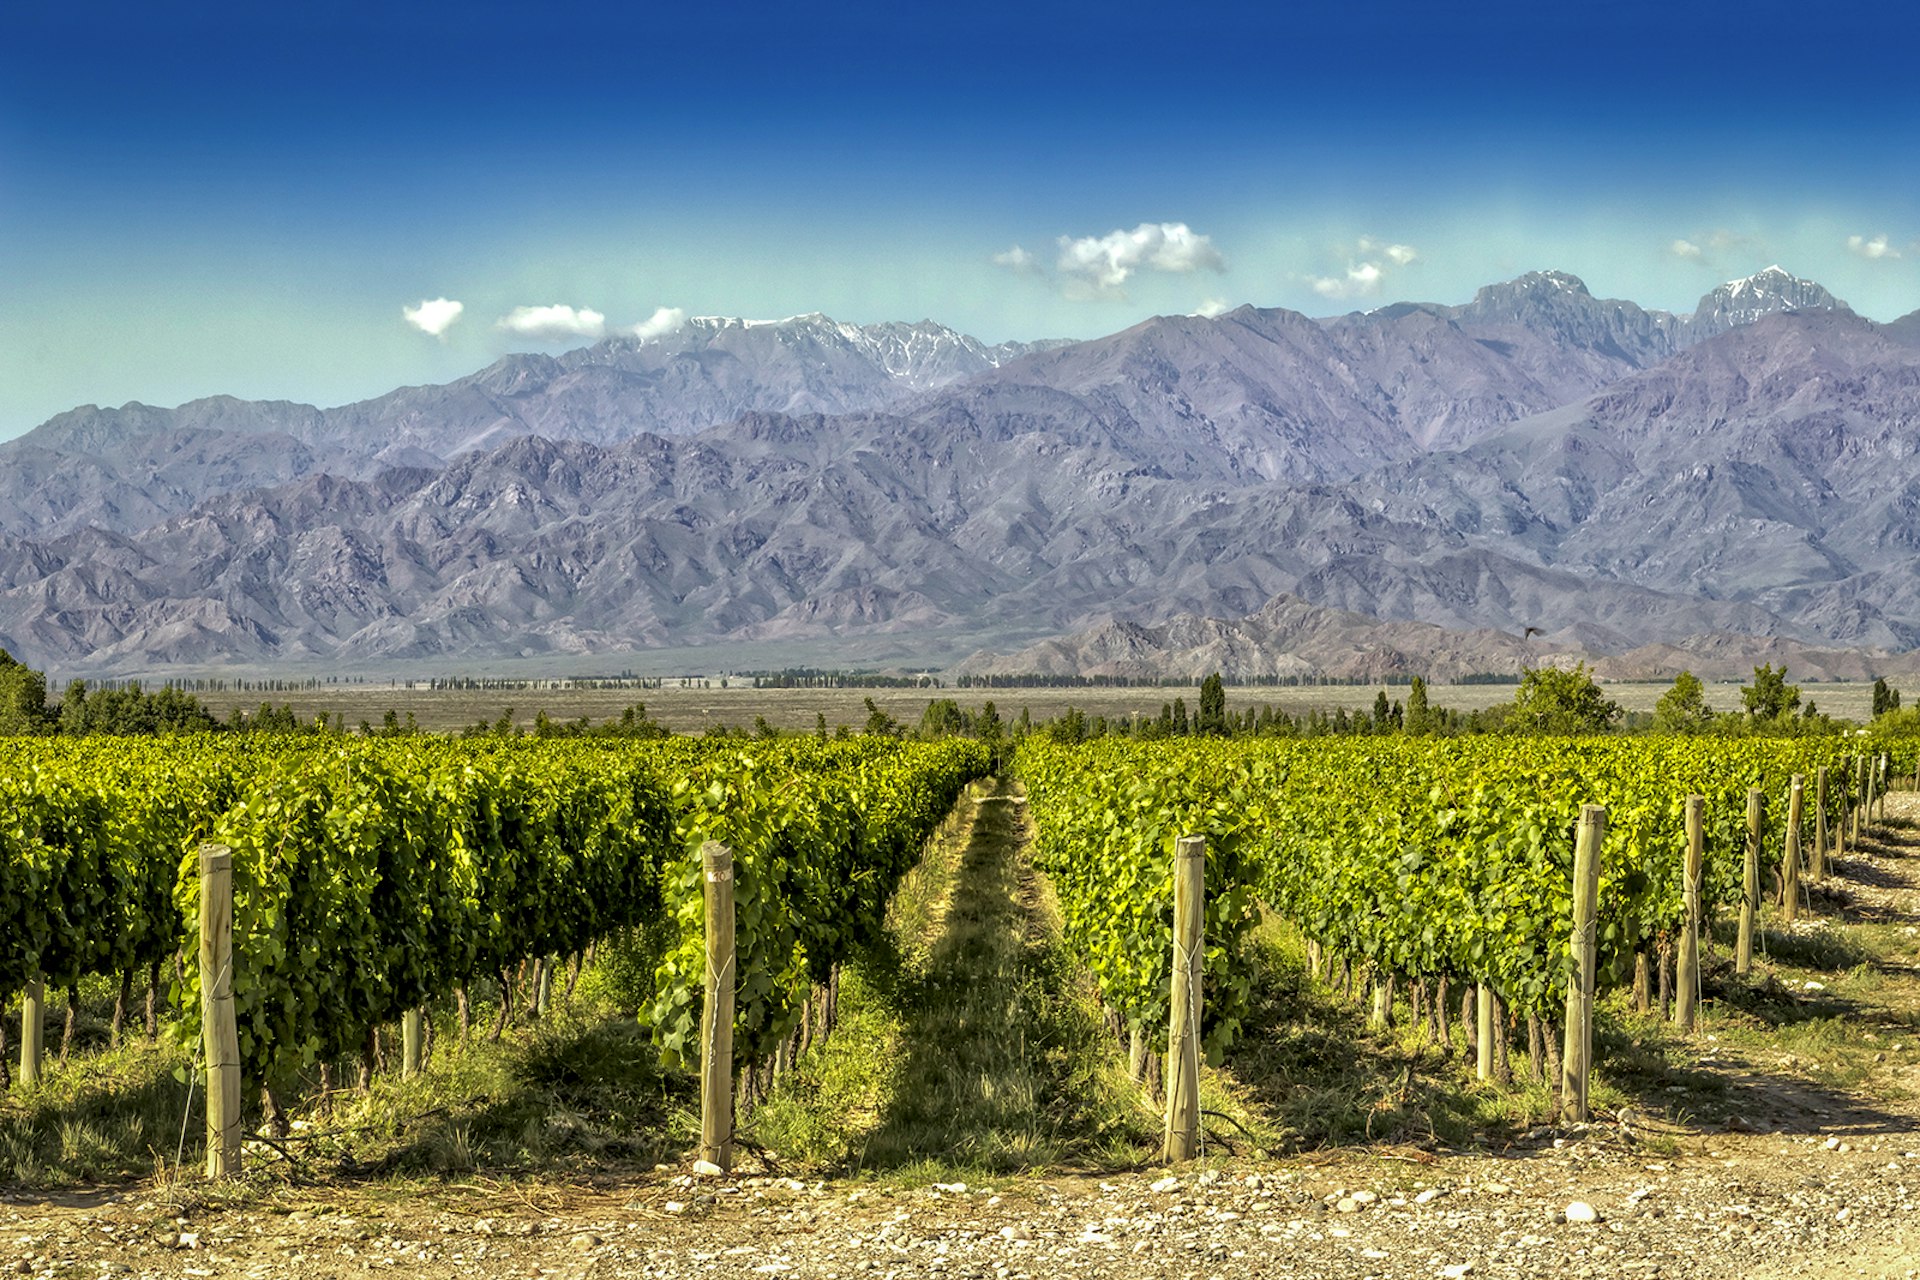 Vineyards stretch towards the horizon of mountains in Mendoza, Argentina